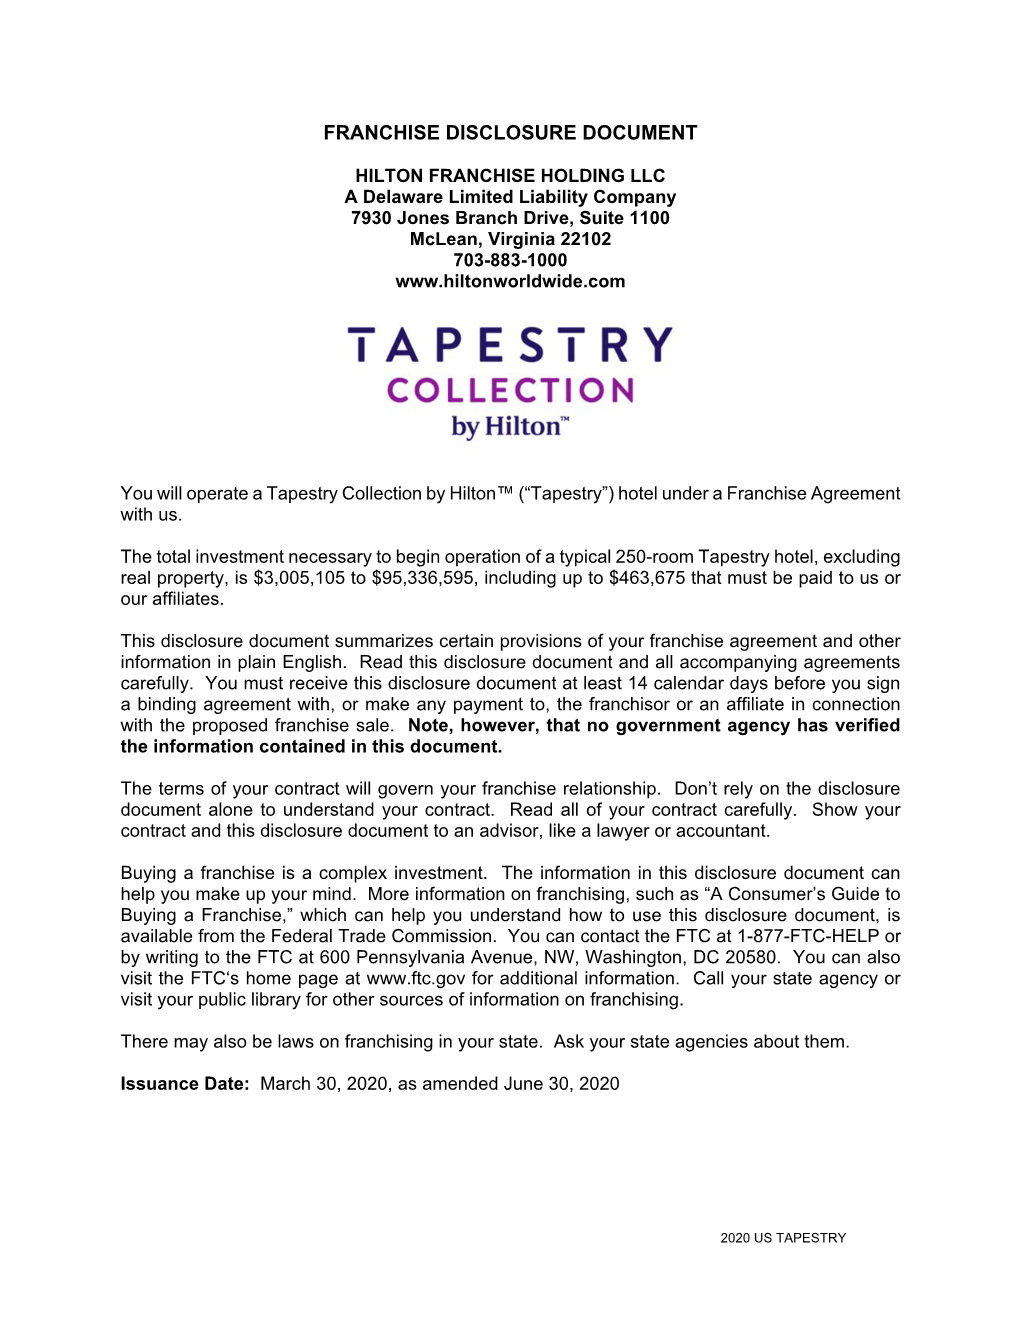 Tapestry Collection by Hilton™ (“Tapestry”) Hotel Under a Franchise Agreement with Us